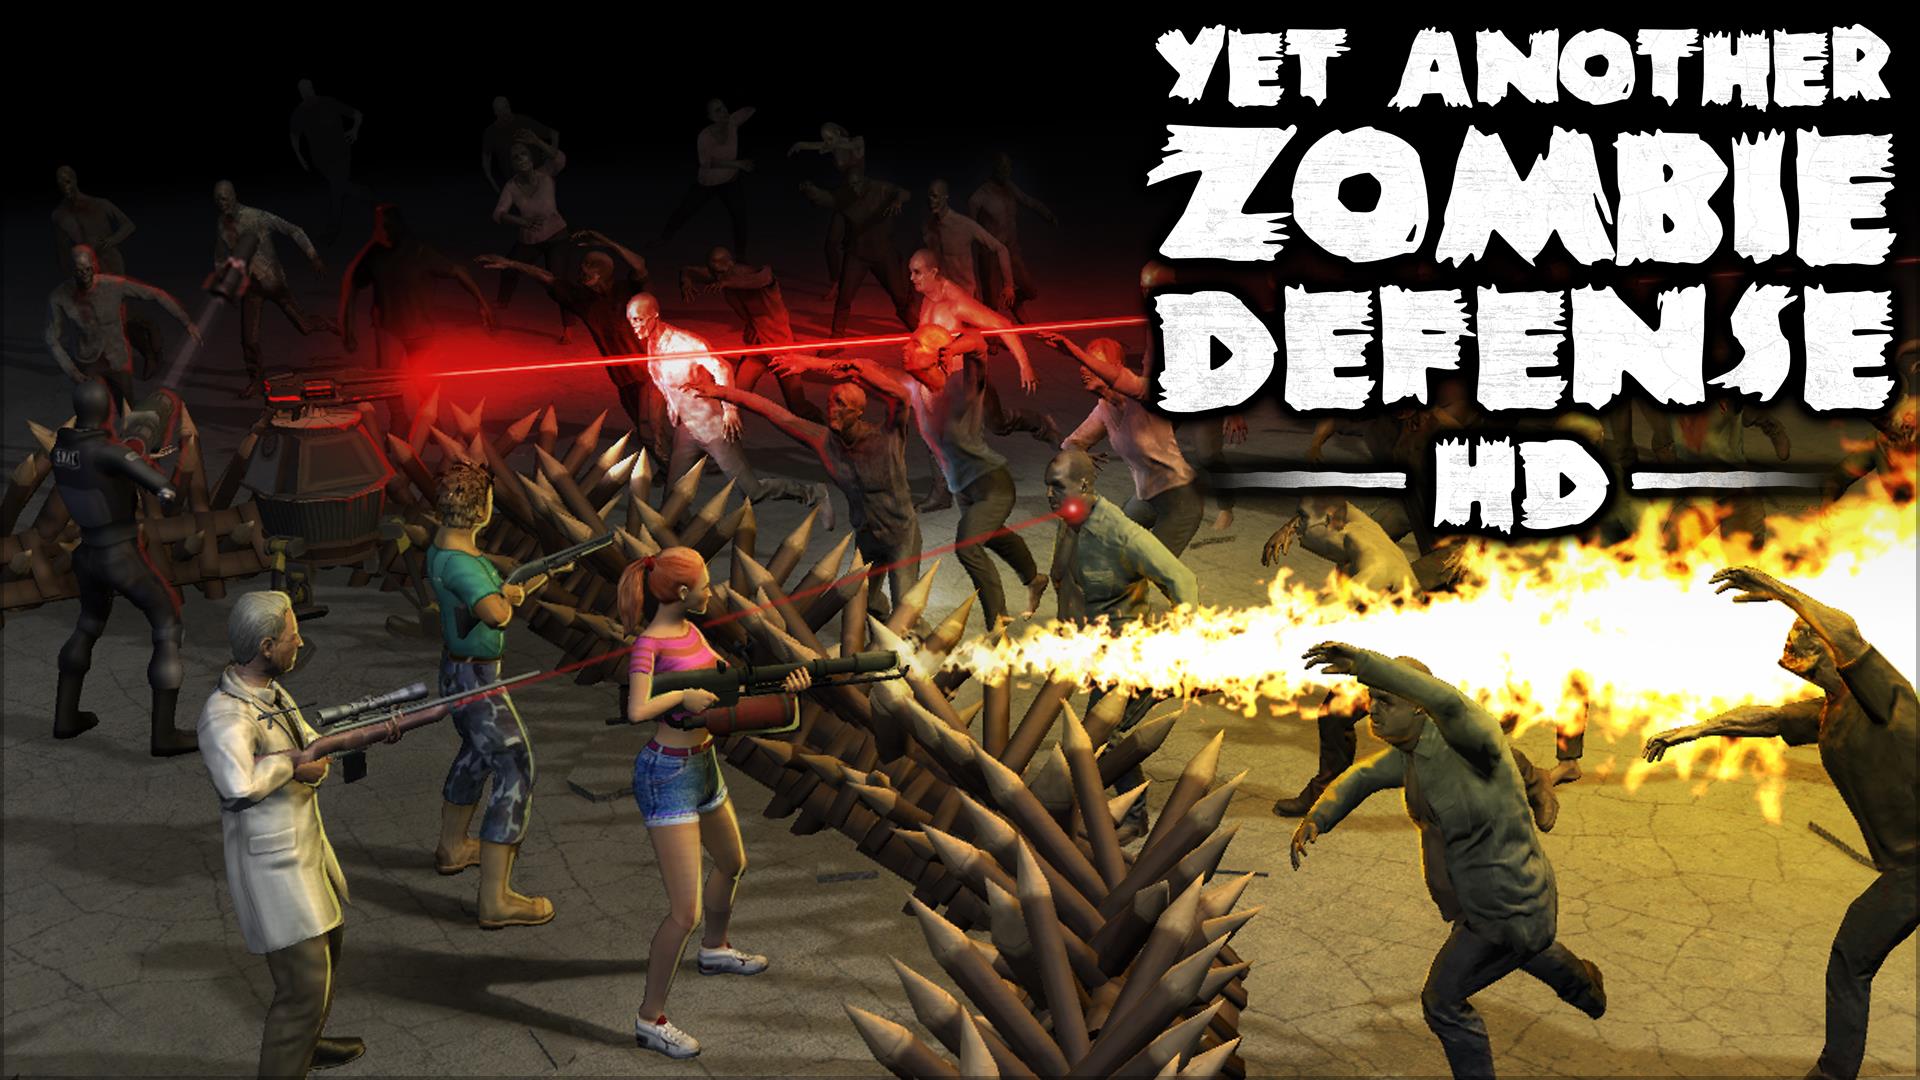 Yet Another Zombie Defense HD in arrivo su Switch